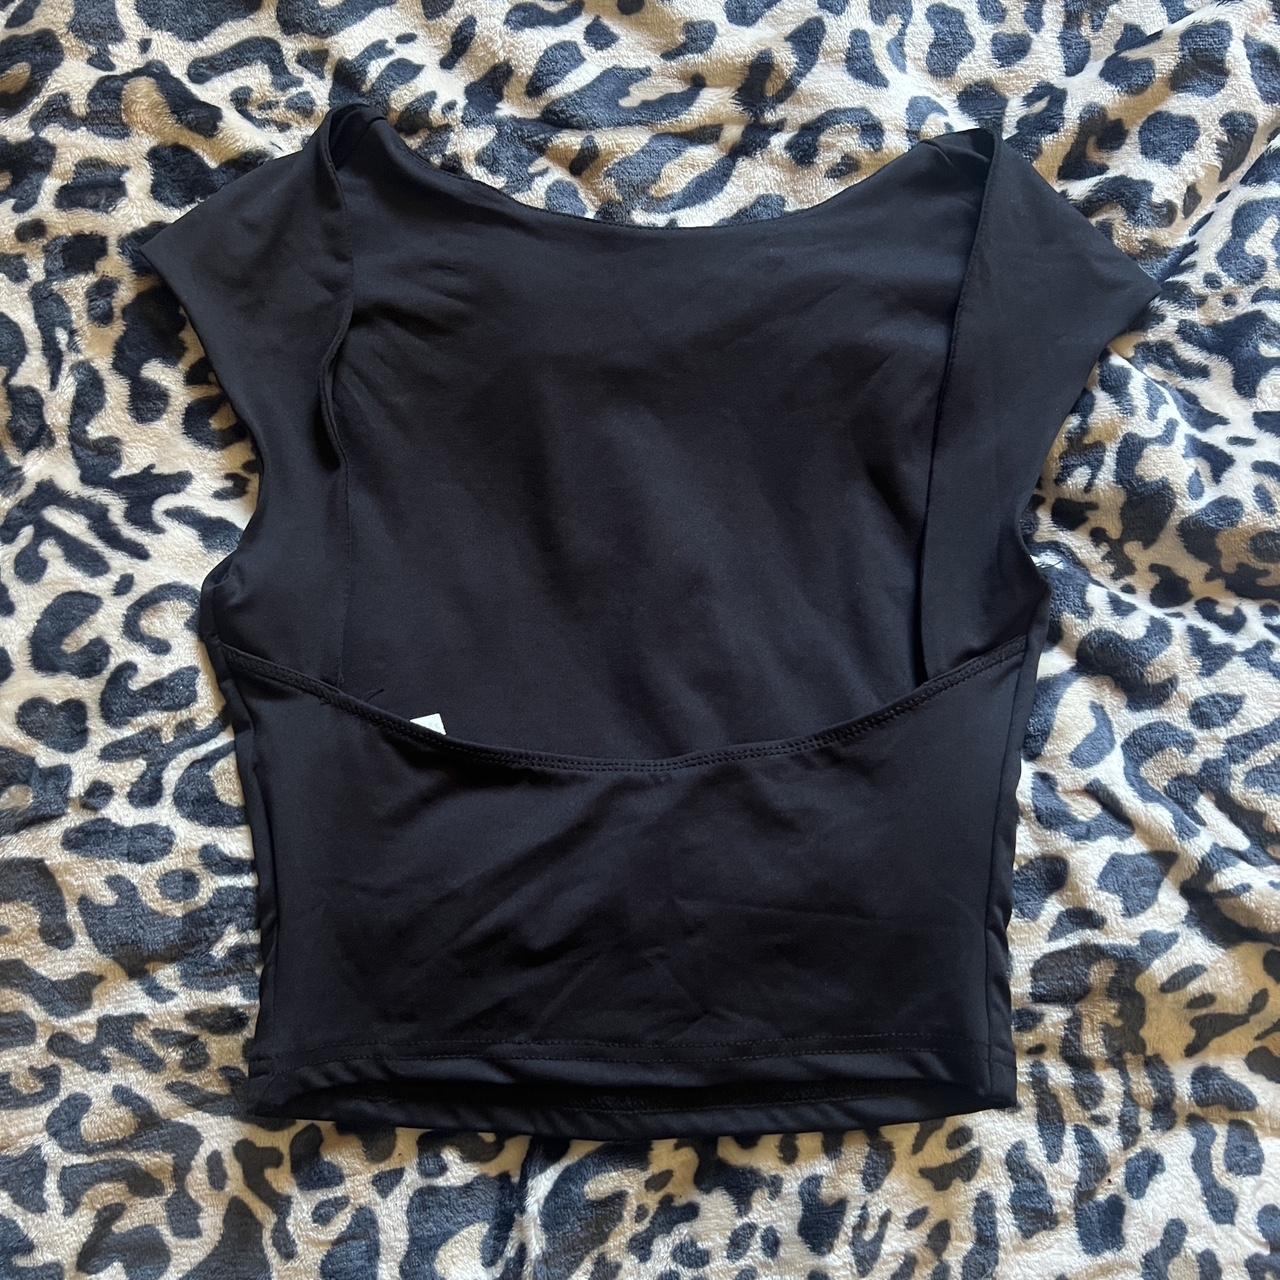 open back top size small. - Depop